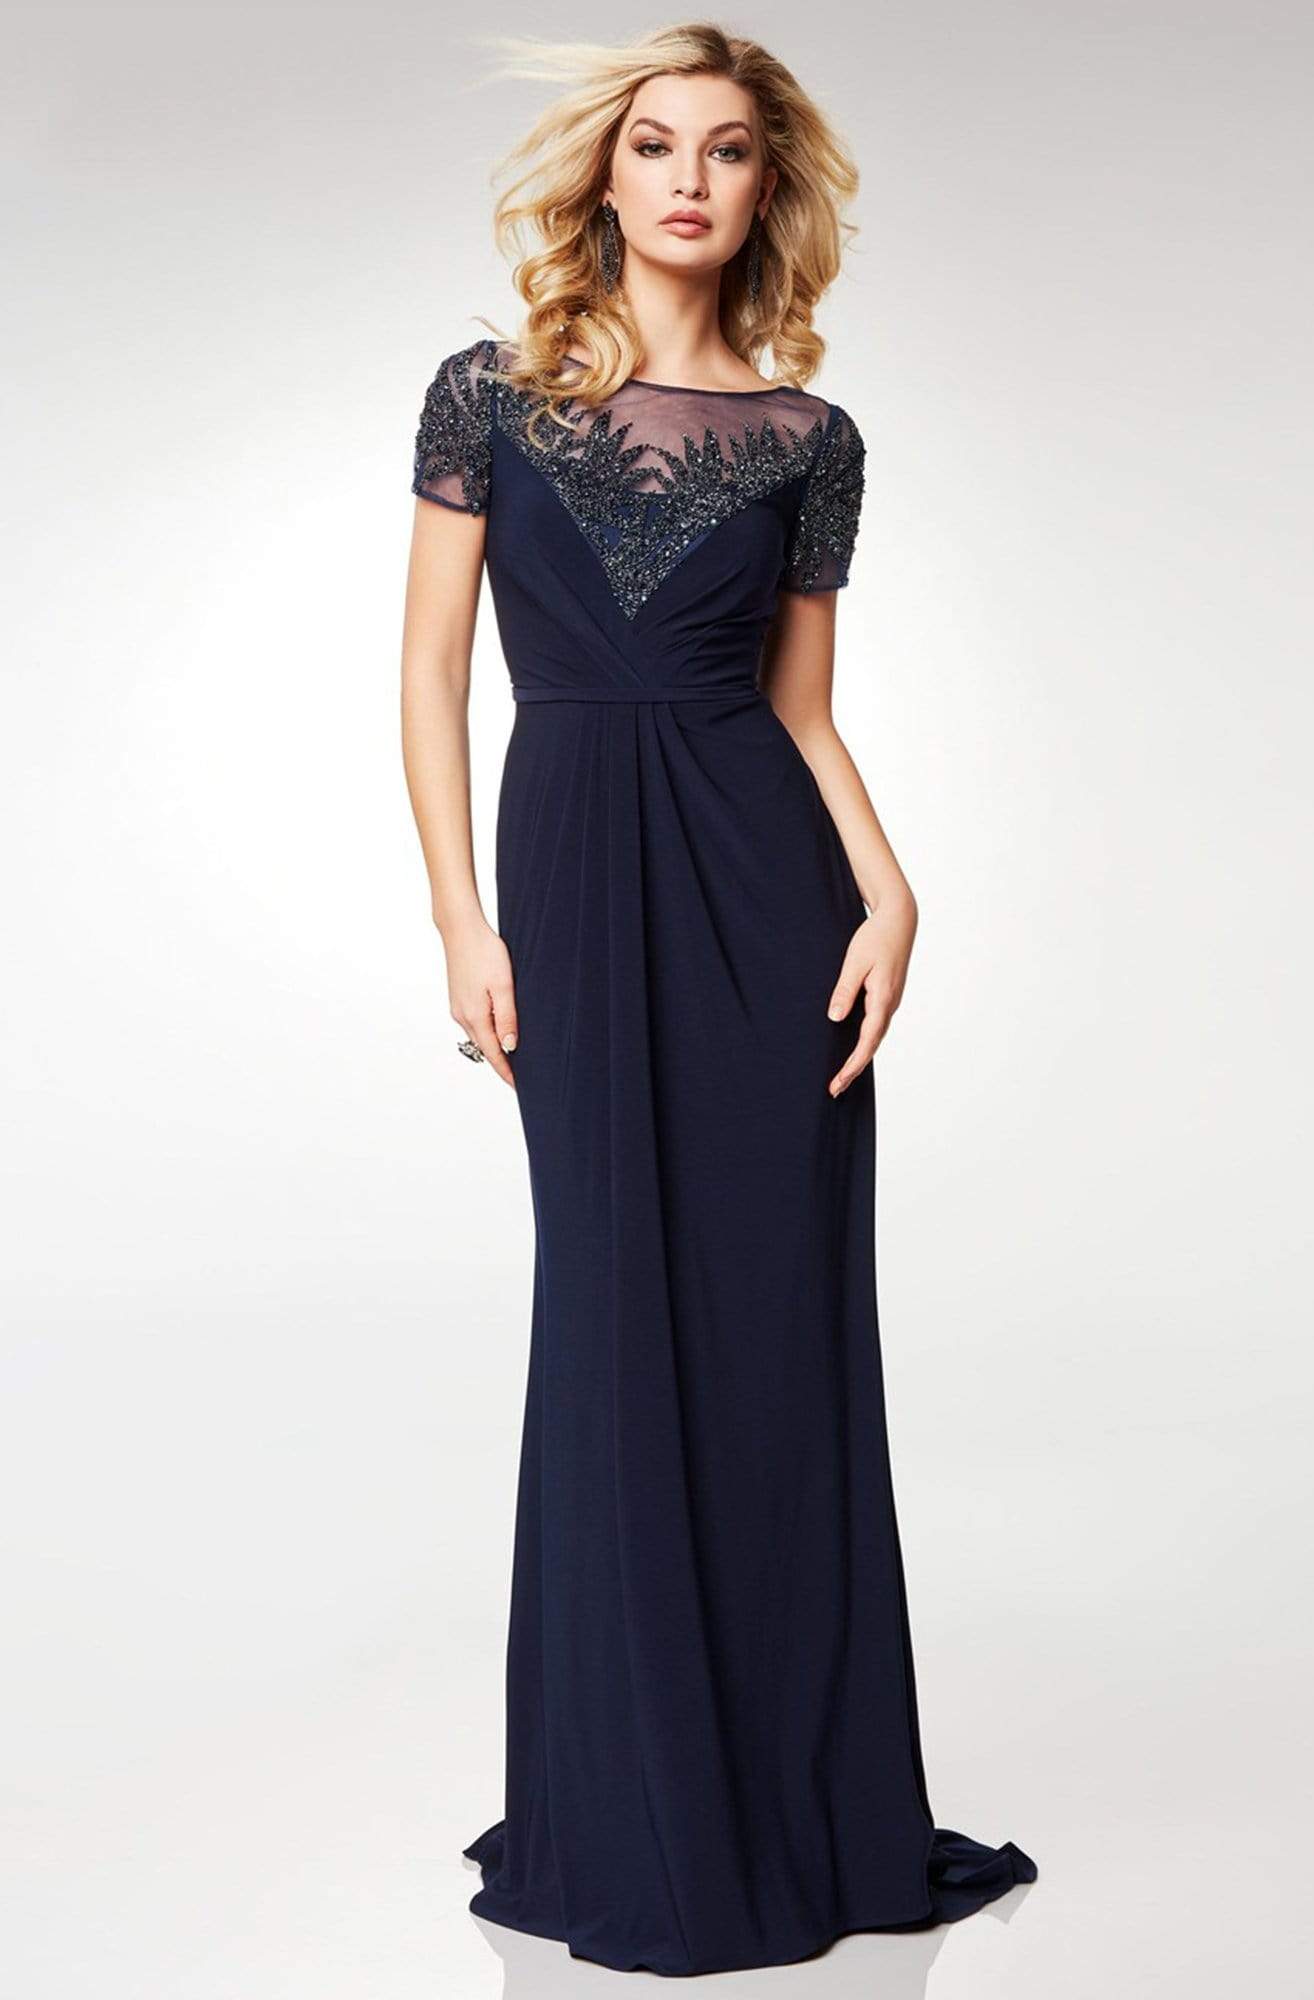 Image of Clarisse - M6532 Illusion Neckline Gleaming Embellished Gown